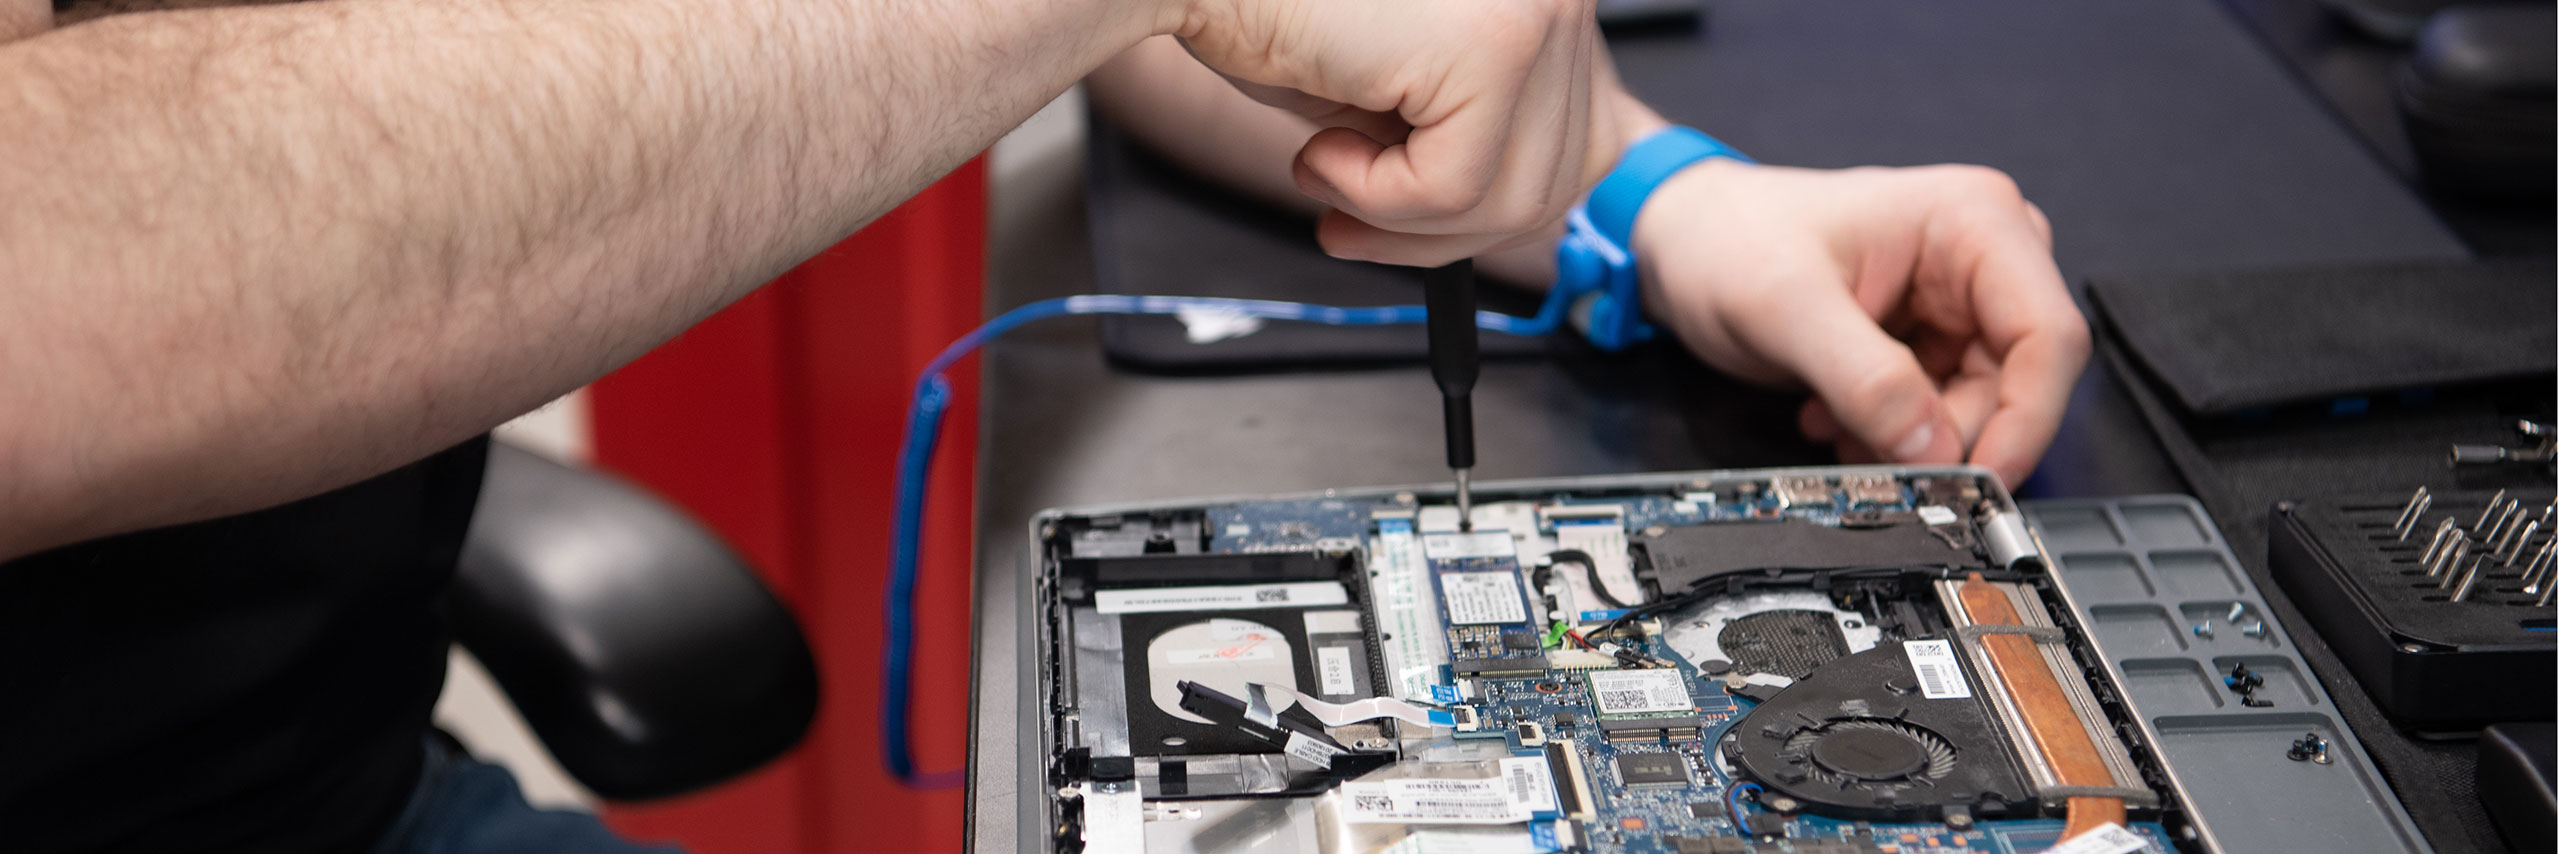 Close-up view of service repairman using a small screwdriver on the internal components of a laptop.